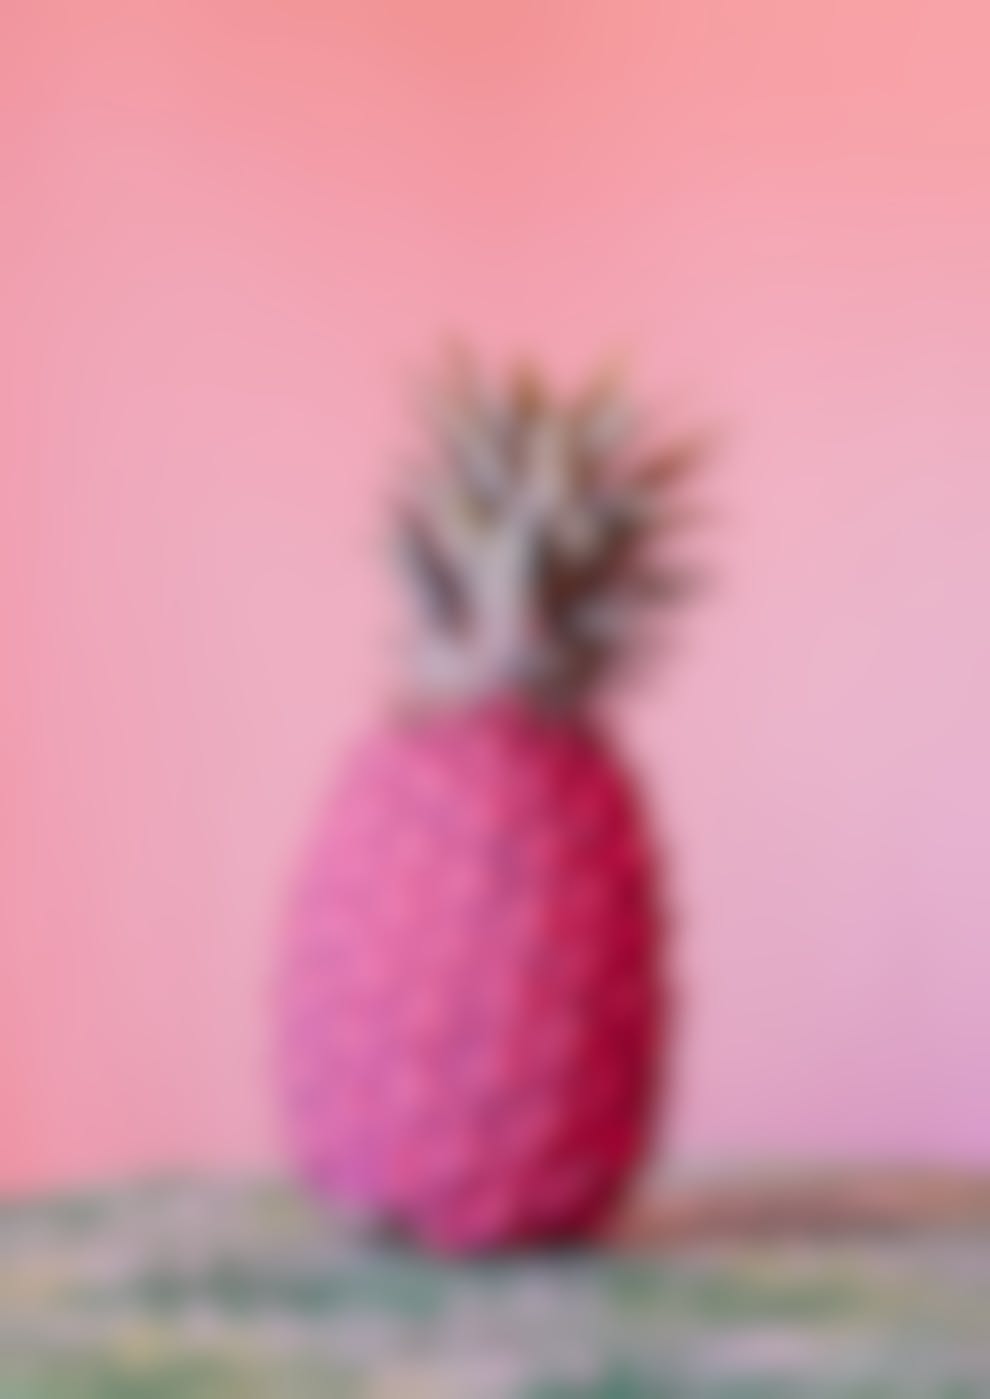 A pink pineapple